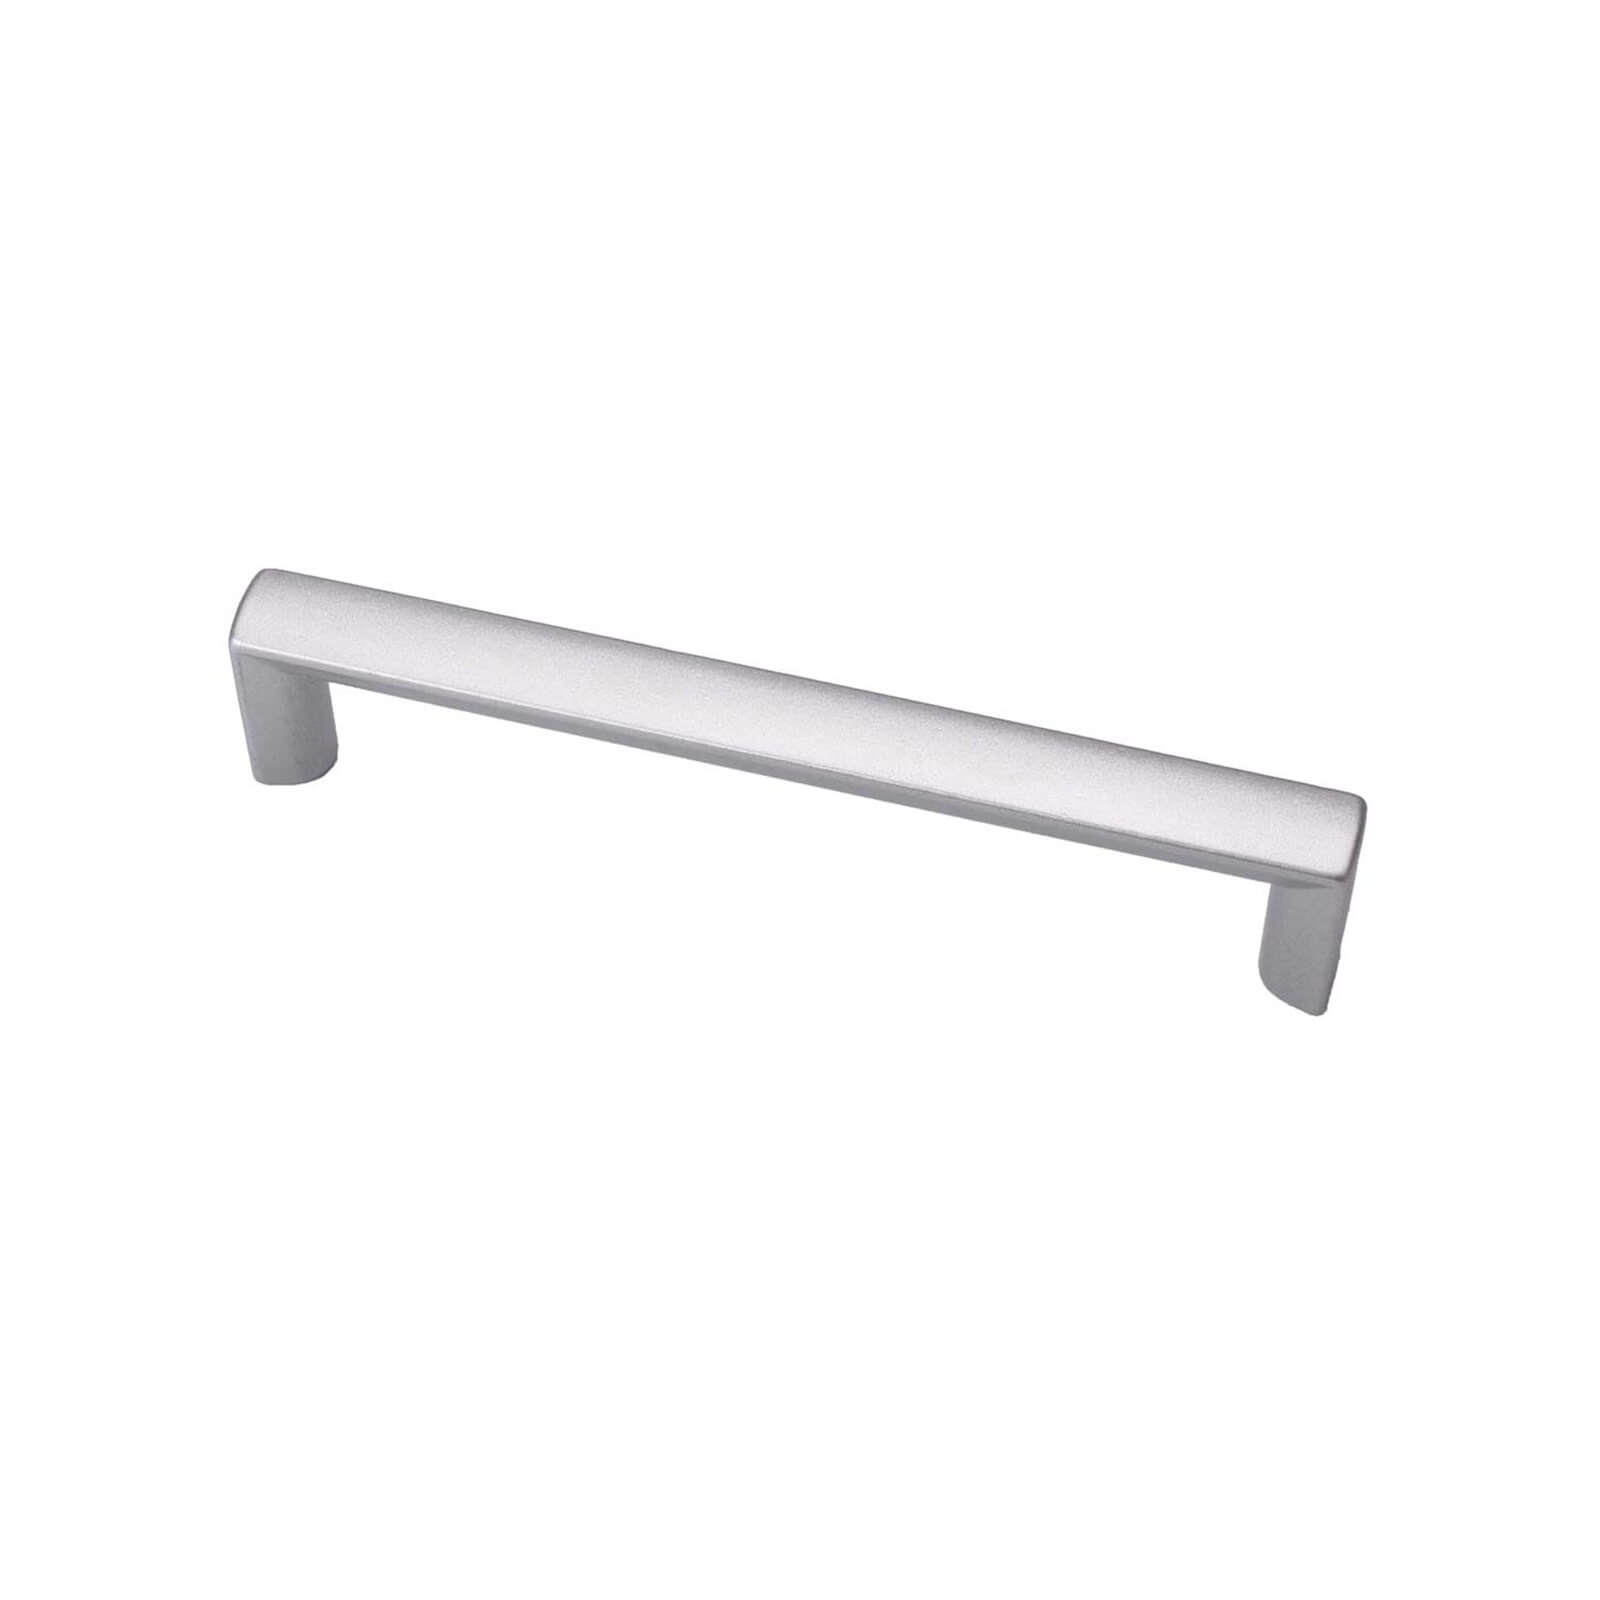 Plastic Mitred Handle - Satin Silver - 128mm